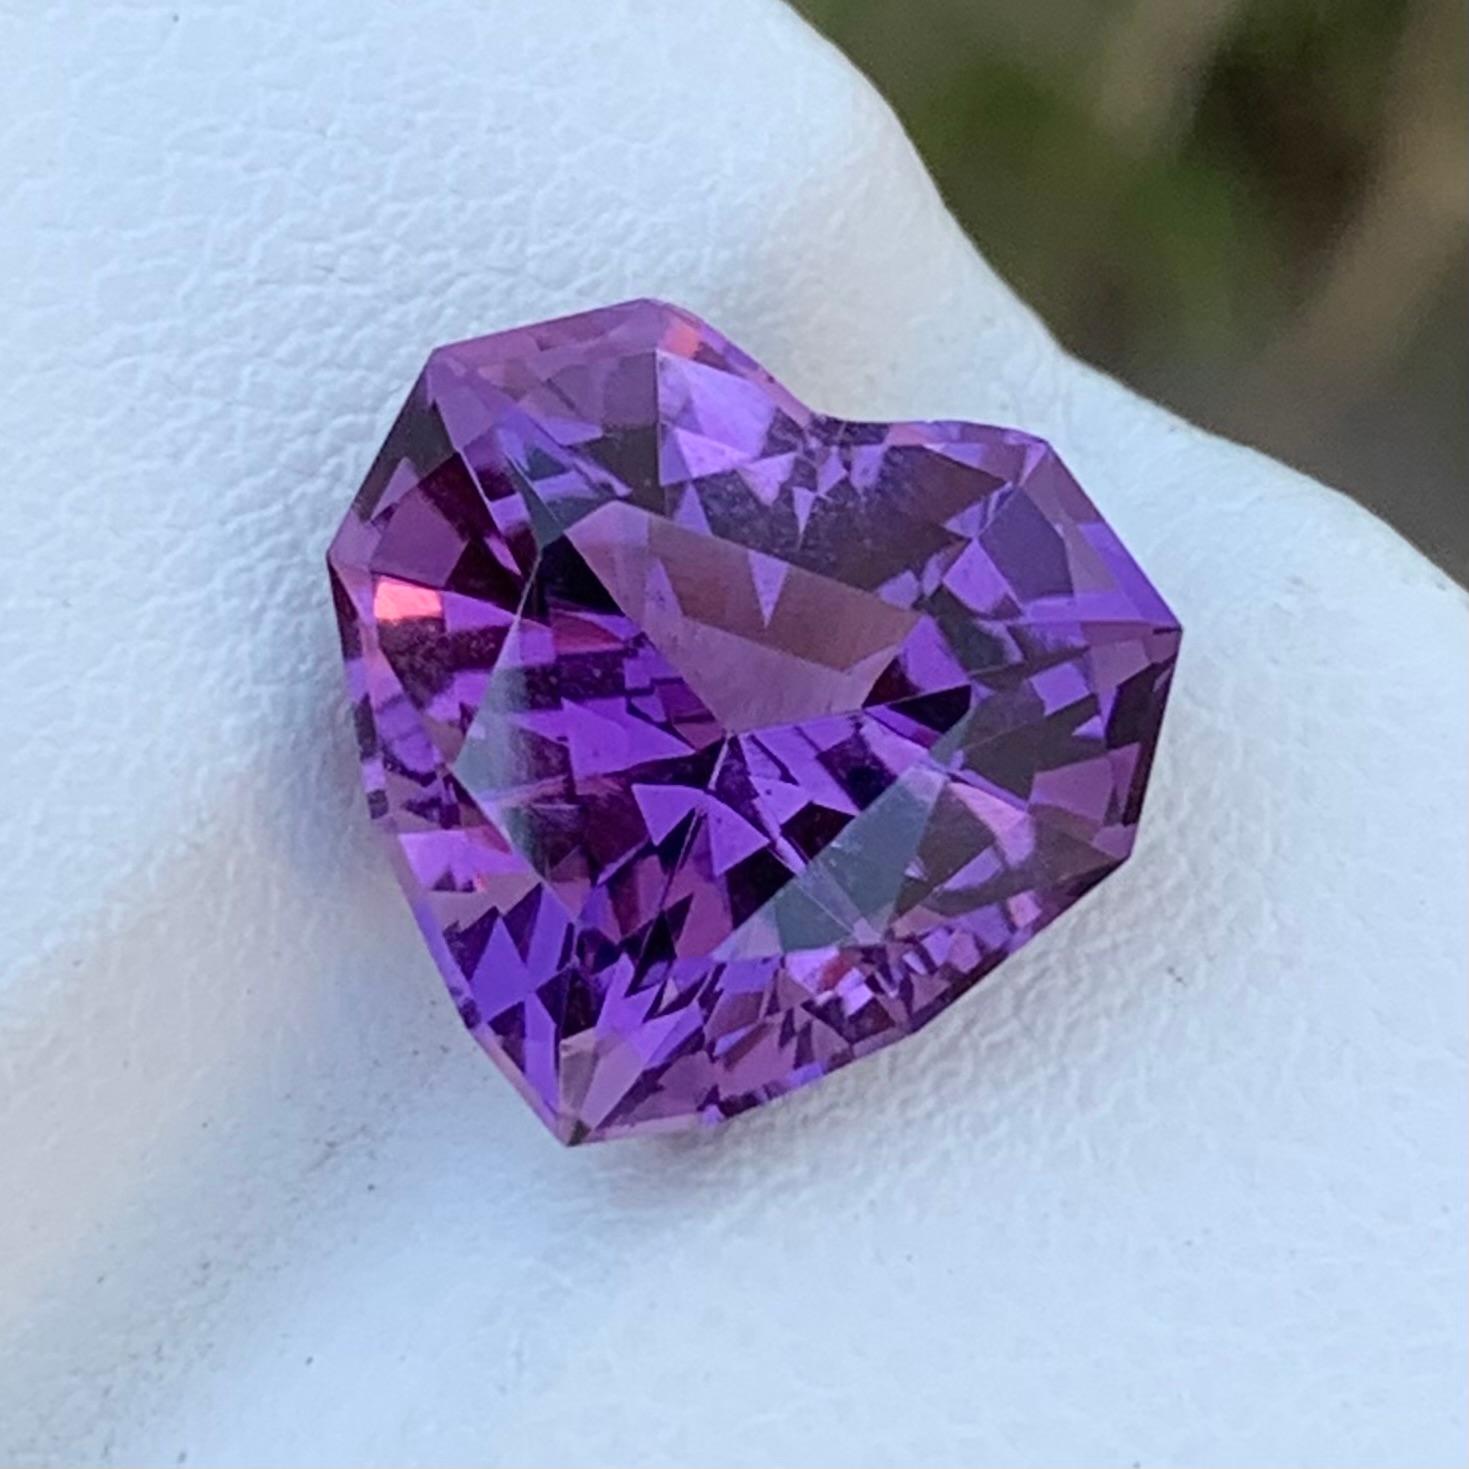 Loose Amethyst
Weight: 5.25 Carats
Dimension: 11.7 x 12.1 x 7.6 Mm
Origin: Brazil
Treatment: Non
Certificate: On Demand
Shape: Heart Shape

Amethyst, a resplendent purple variety of quartz, has captivated humanity for centuries with its enchanting